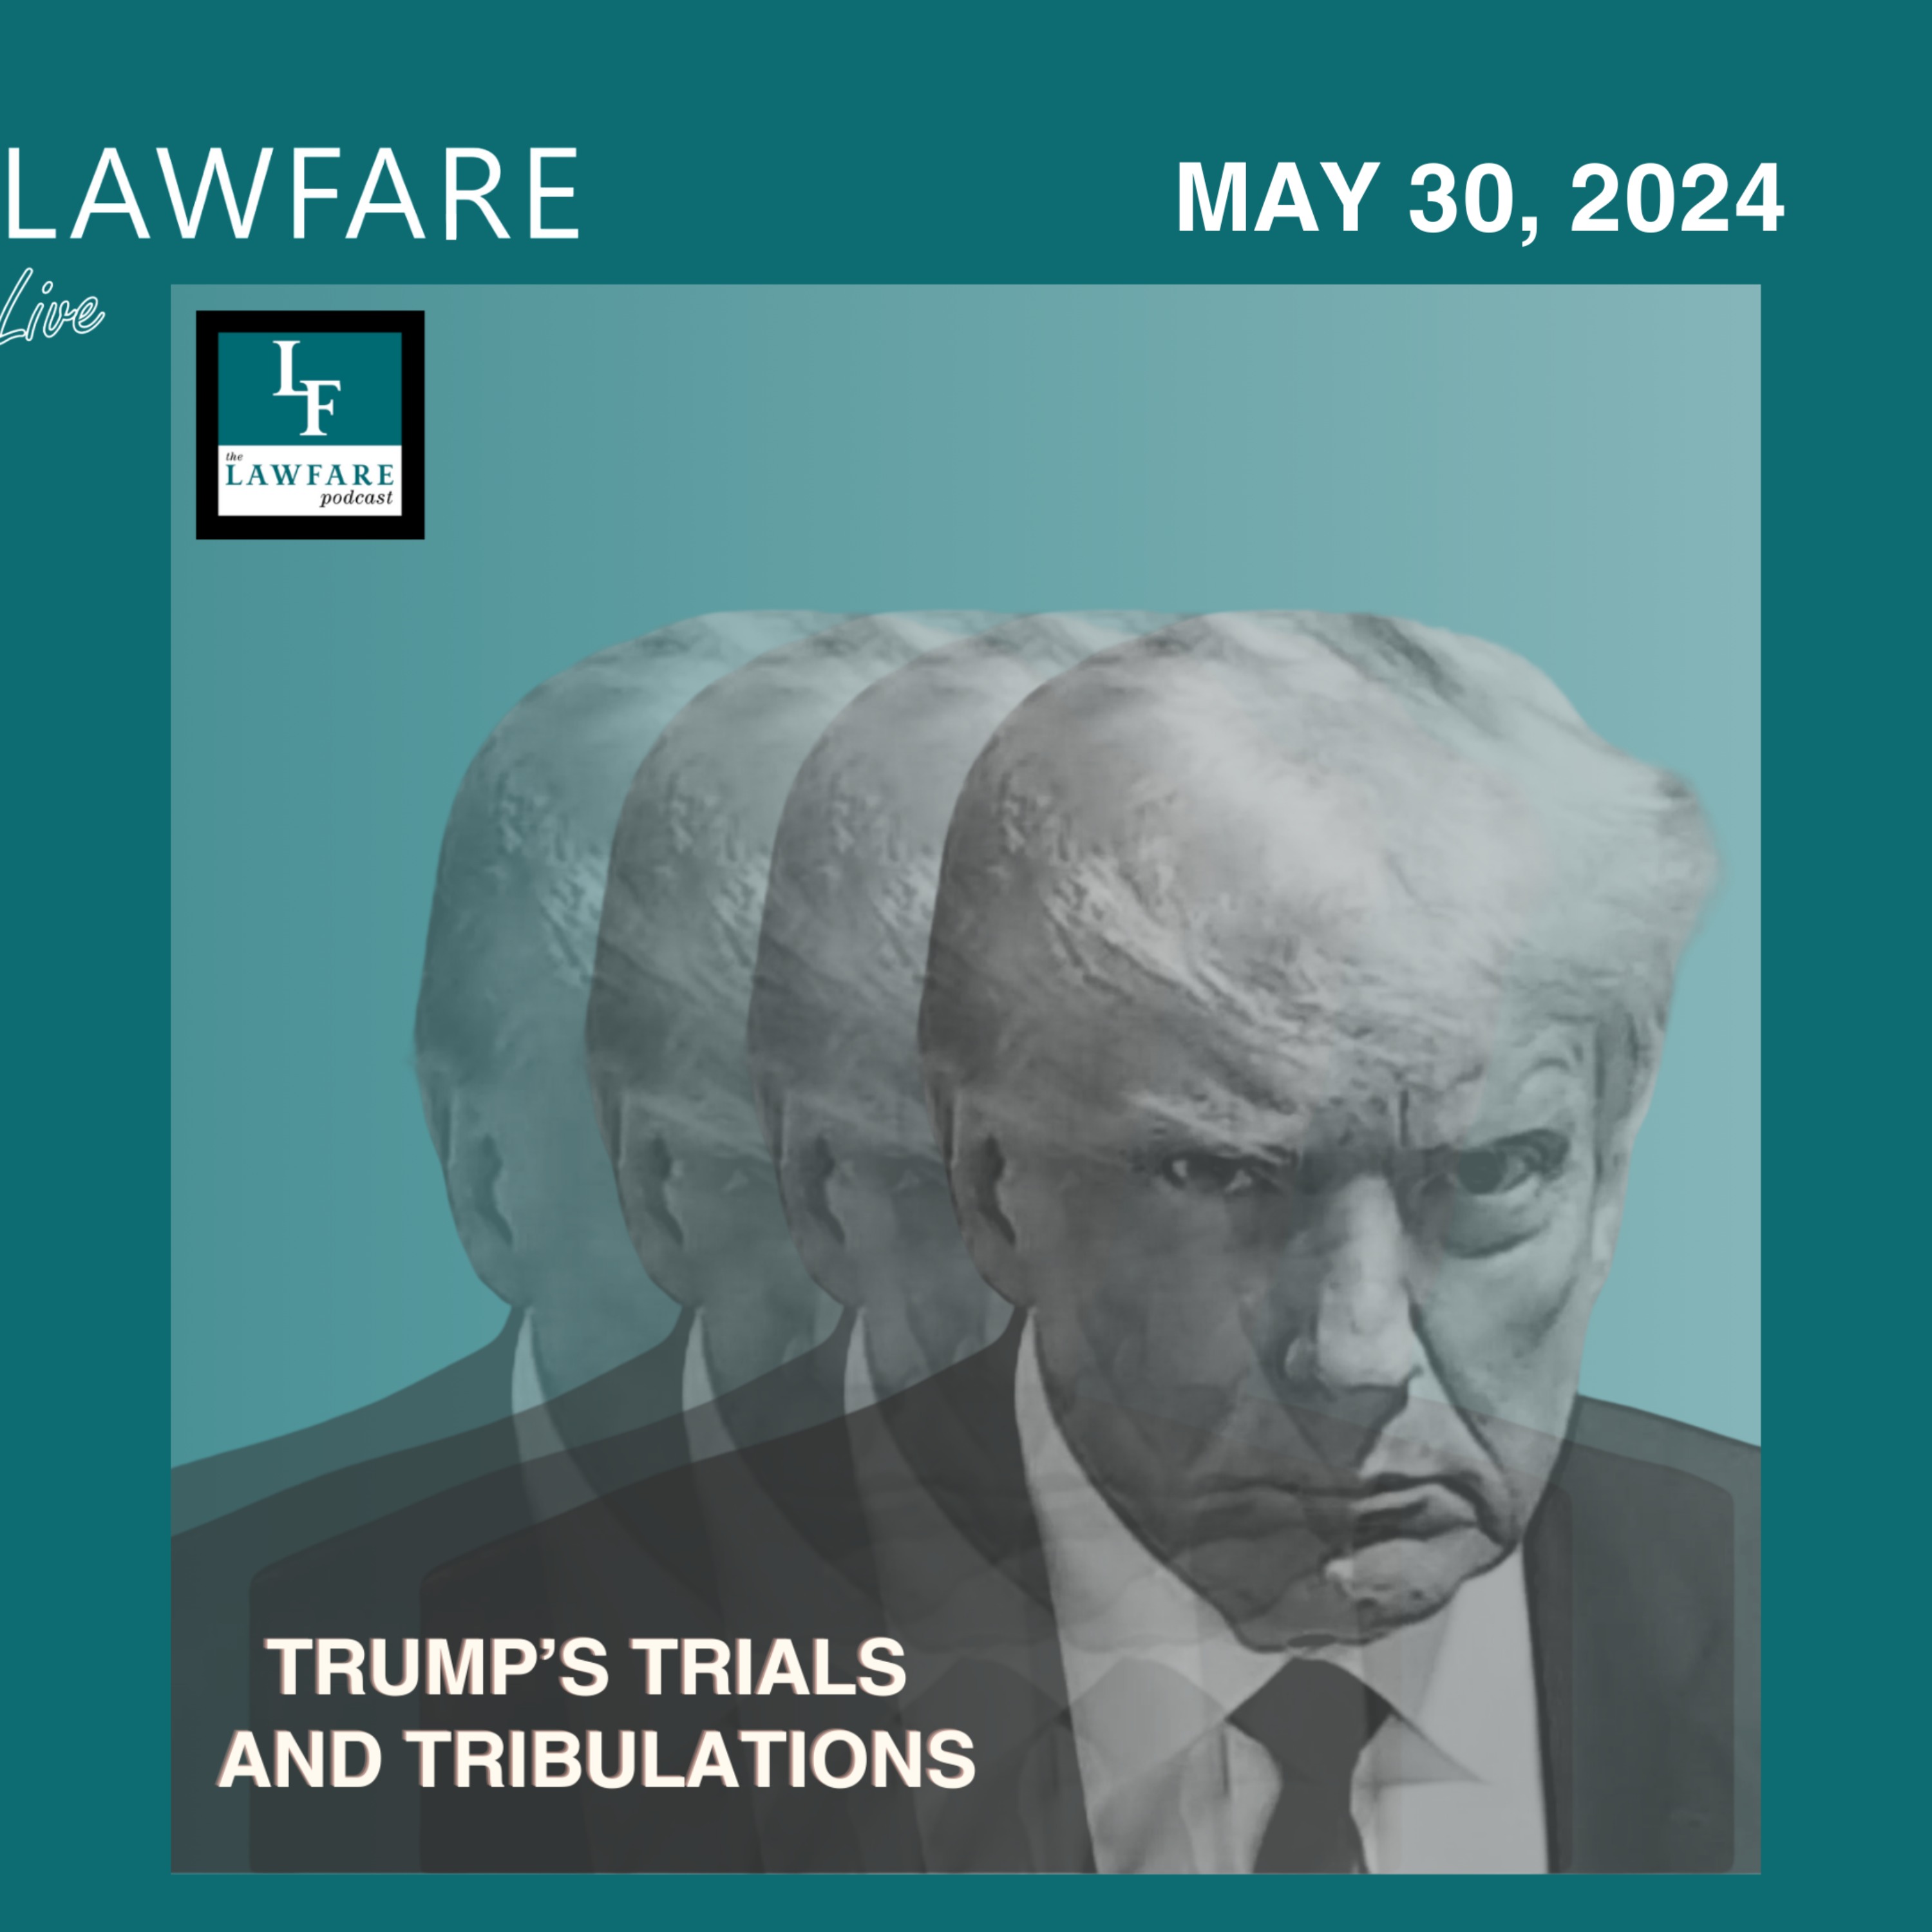 Lawfare Daily: Trump Trials and Tribulations Weekly Round-up (May 30, 2024)